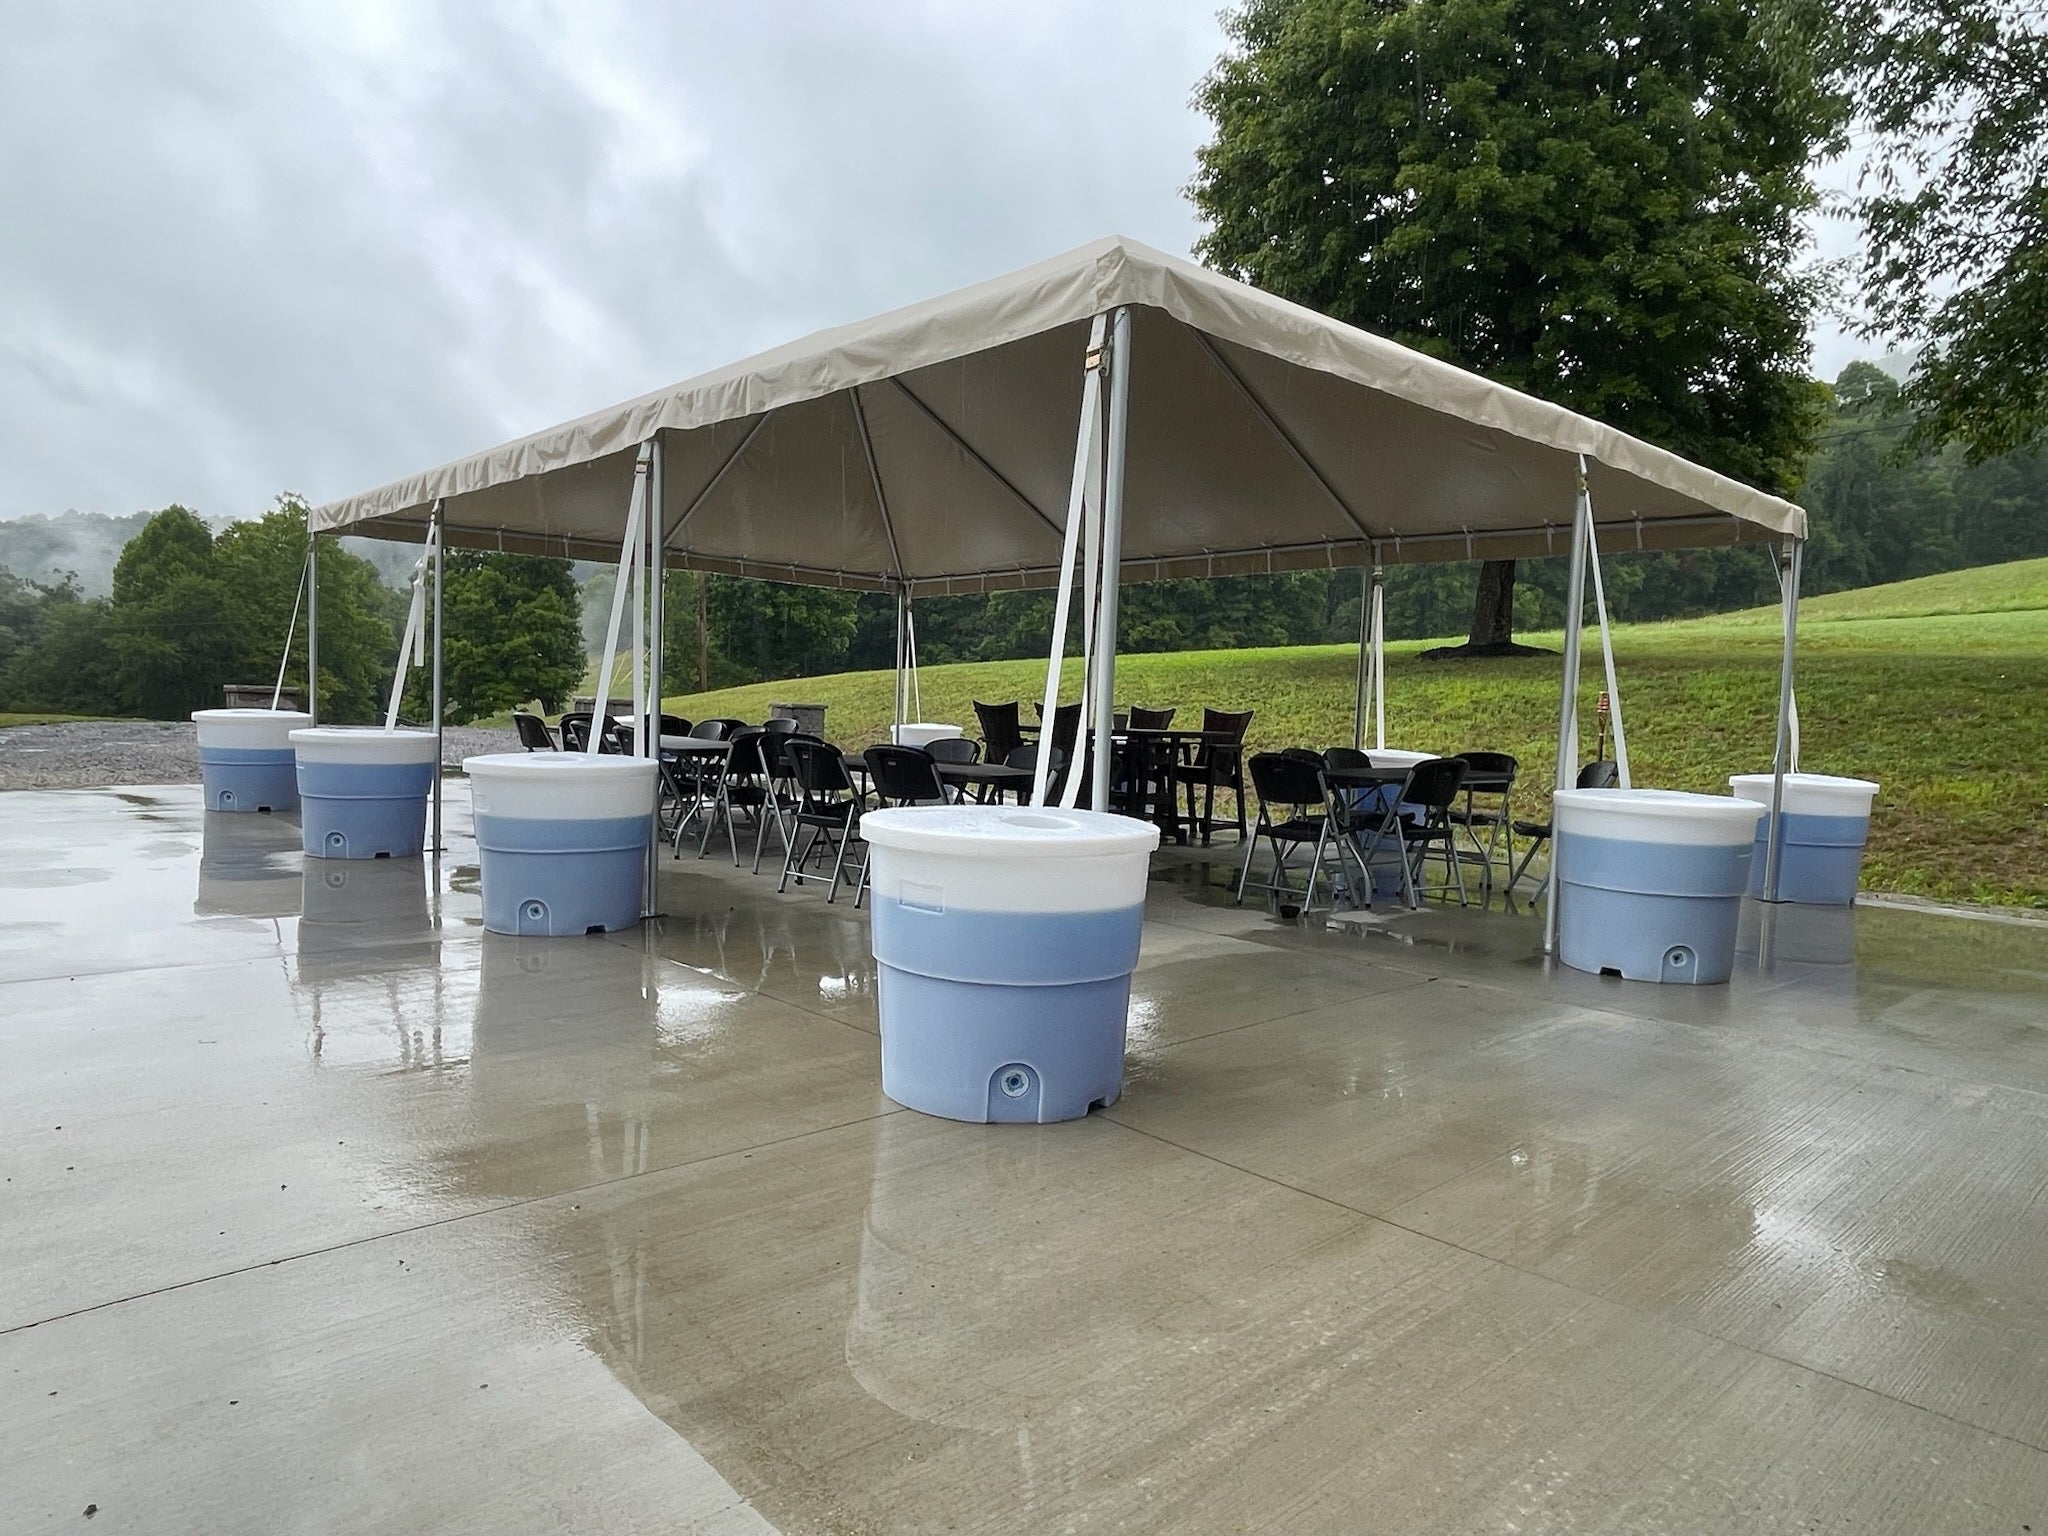 20' x 40' Commercial Party Frame Tent for Sale